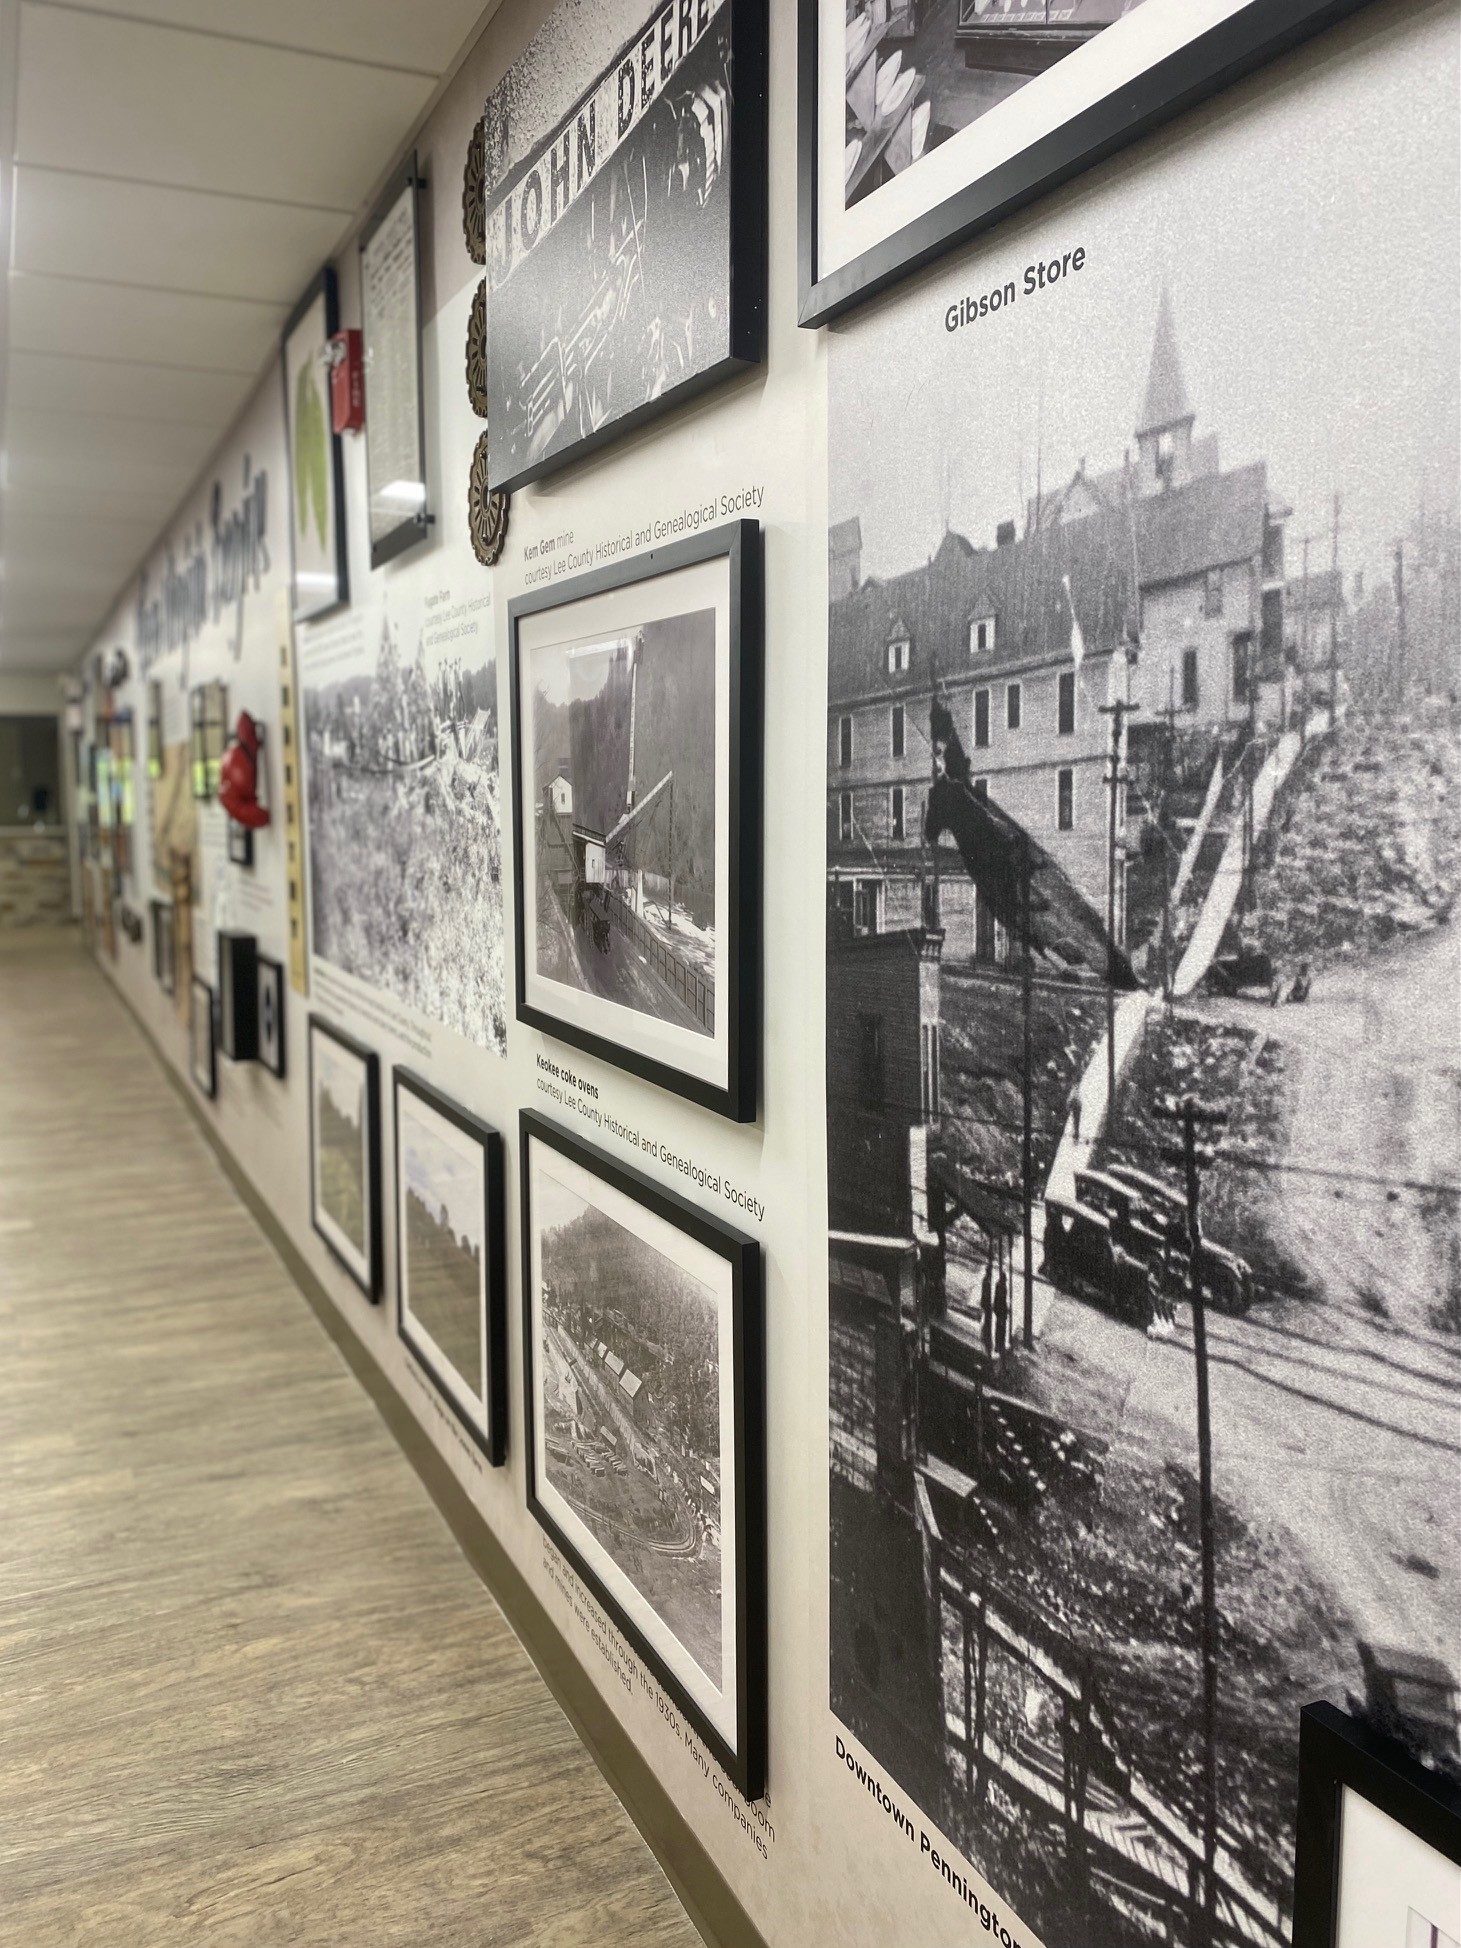 Historic art and photos of Pennington Gap on the Heritage Wall in Lee County Community Hospital